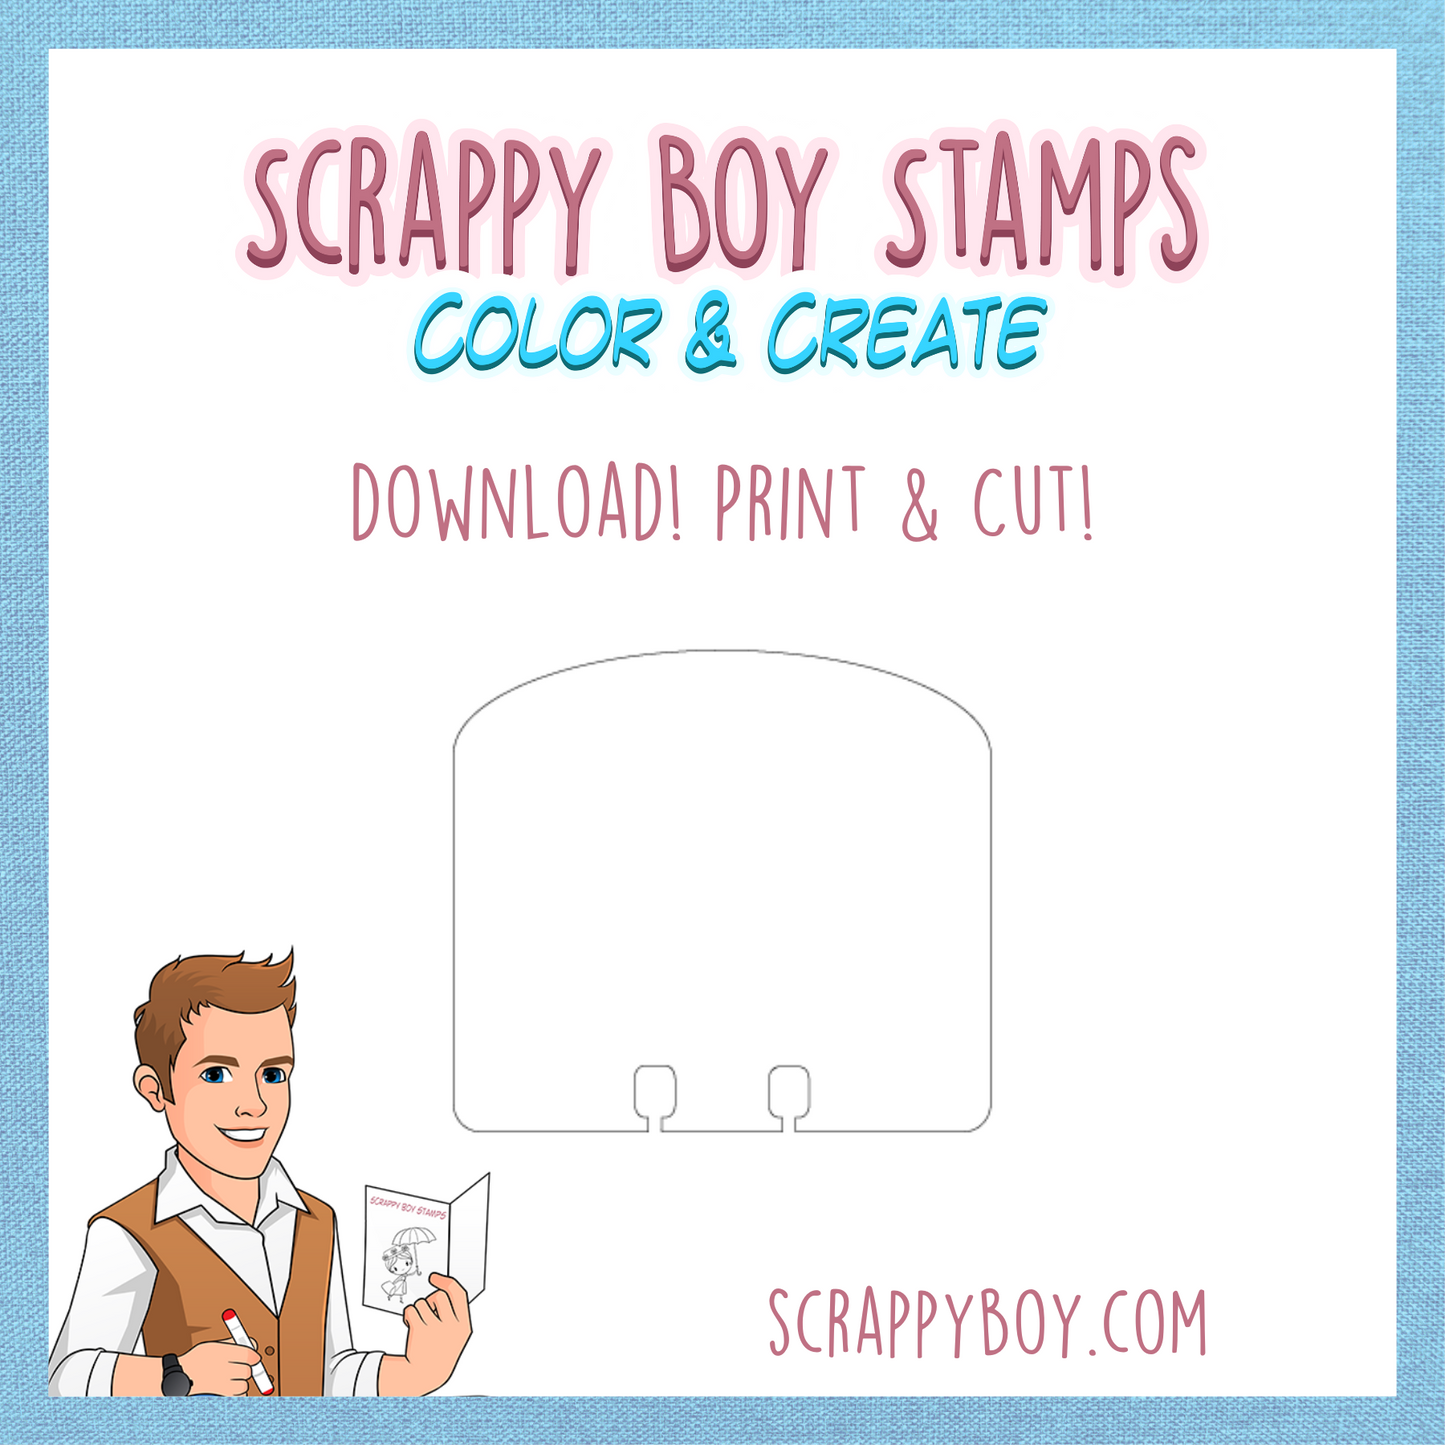 Memory Dex Print Out Scrappy Boy Stamps